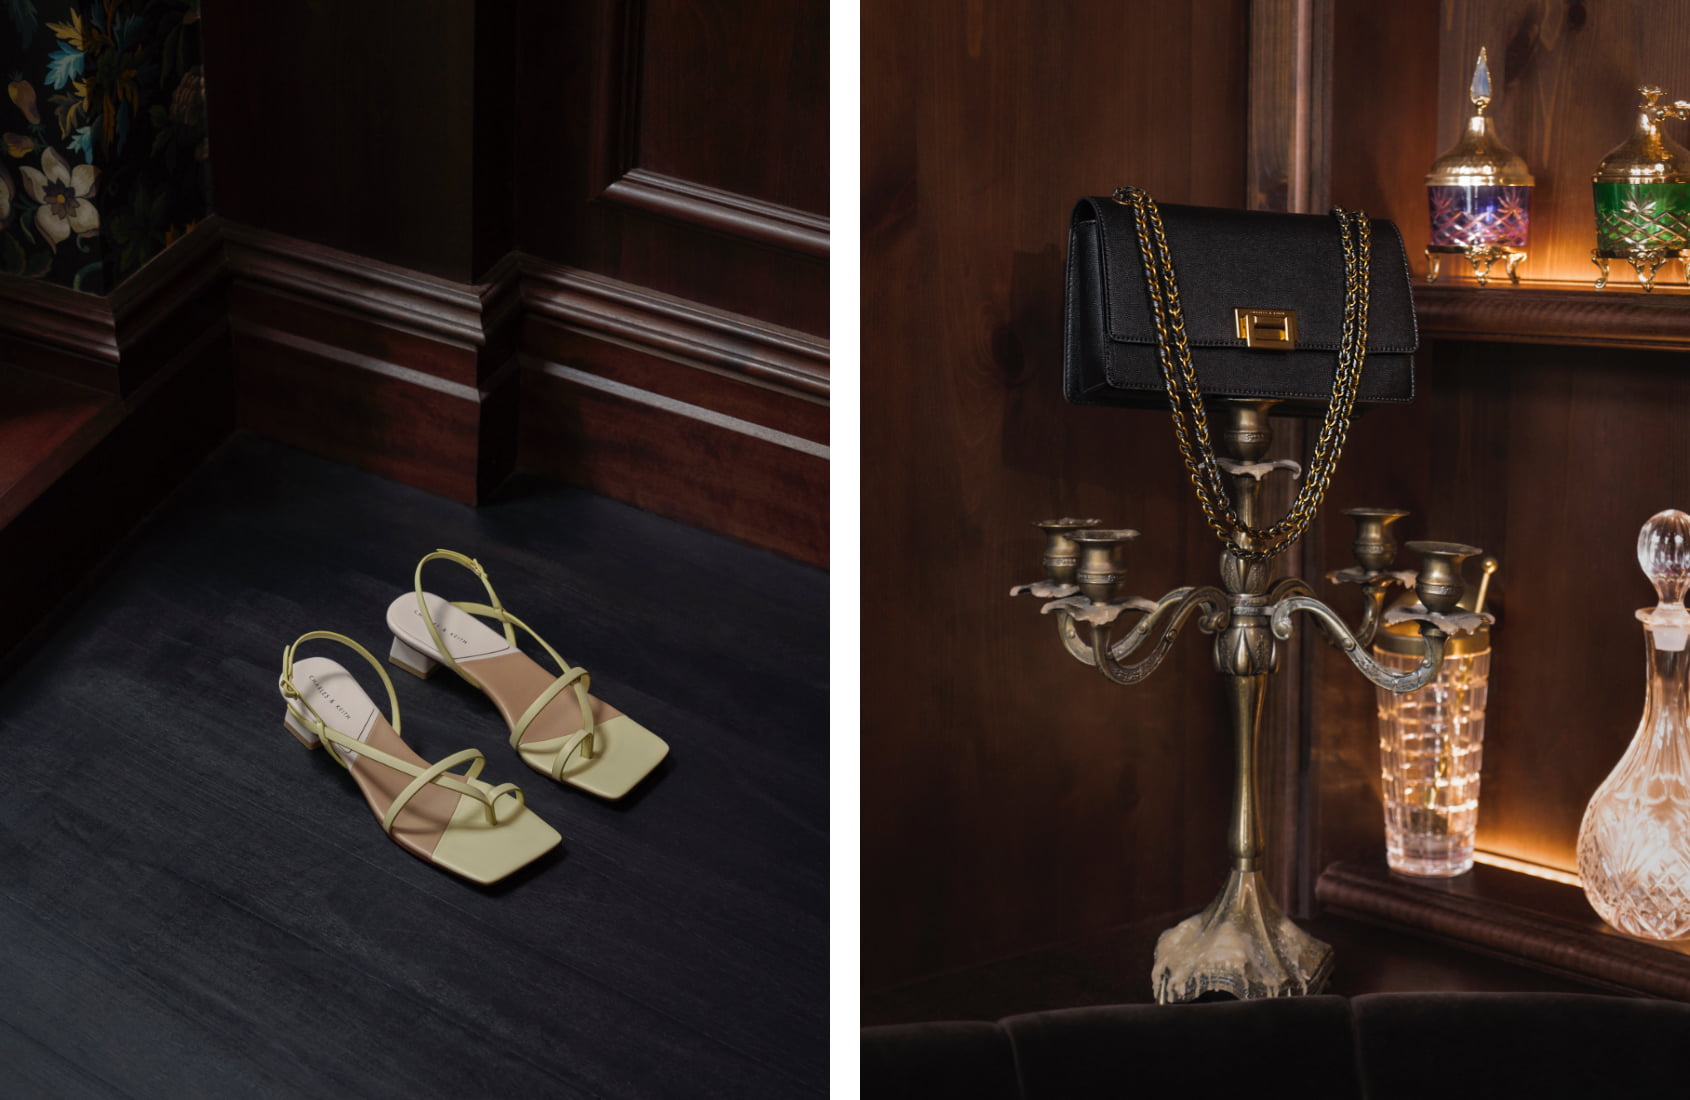 Eid Collection  Summer 2021 - CHARLES & KEITH International